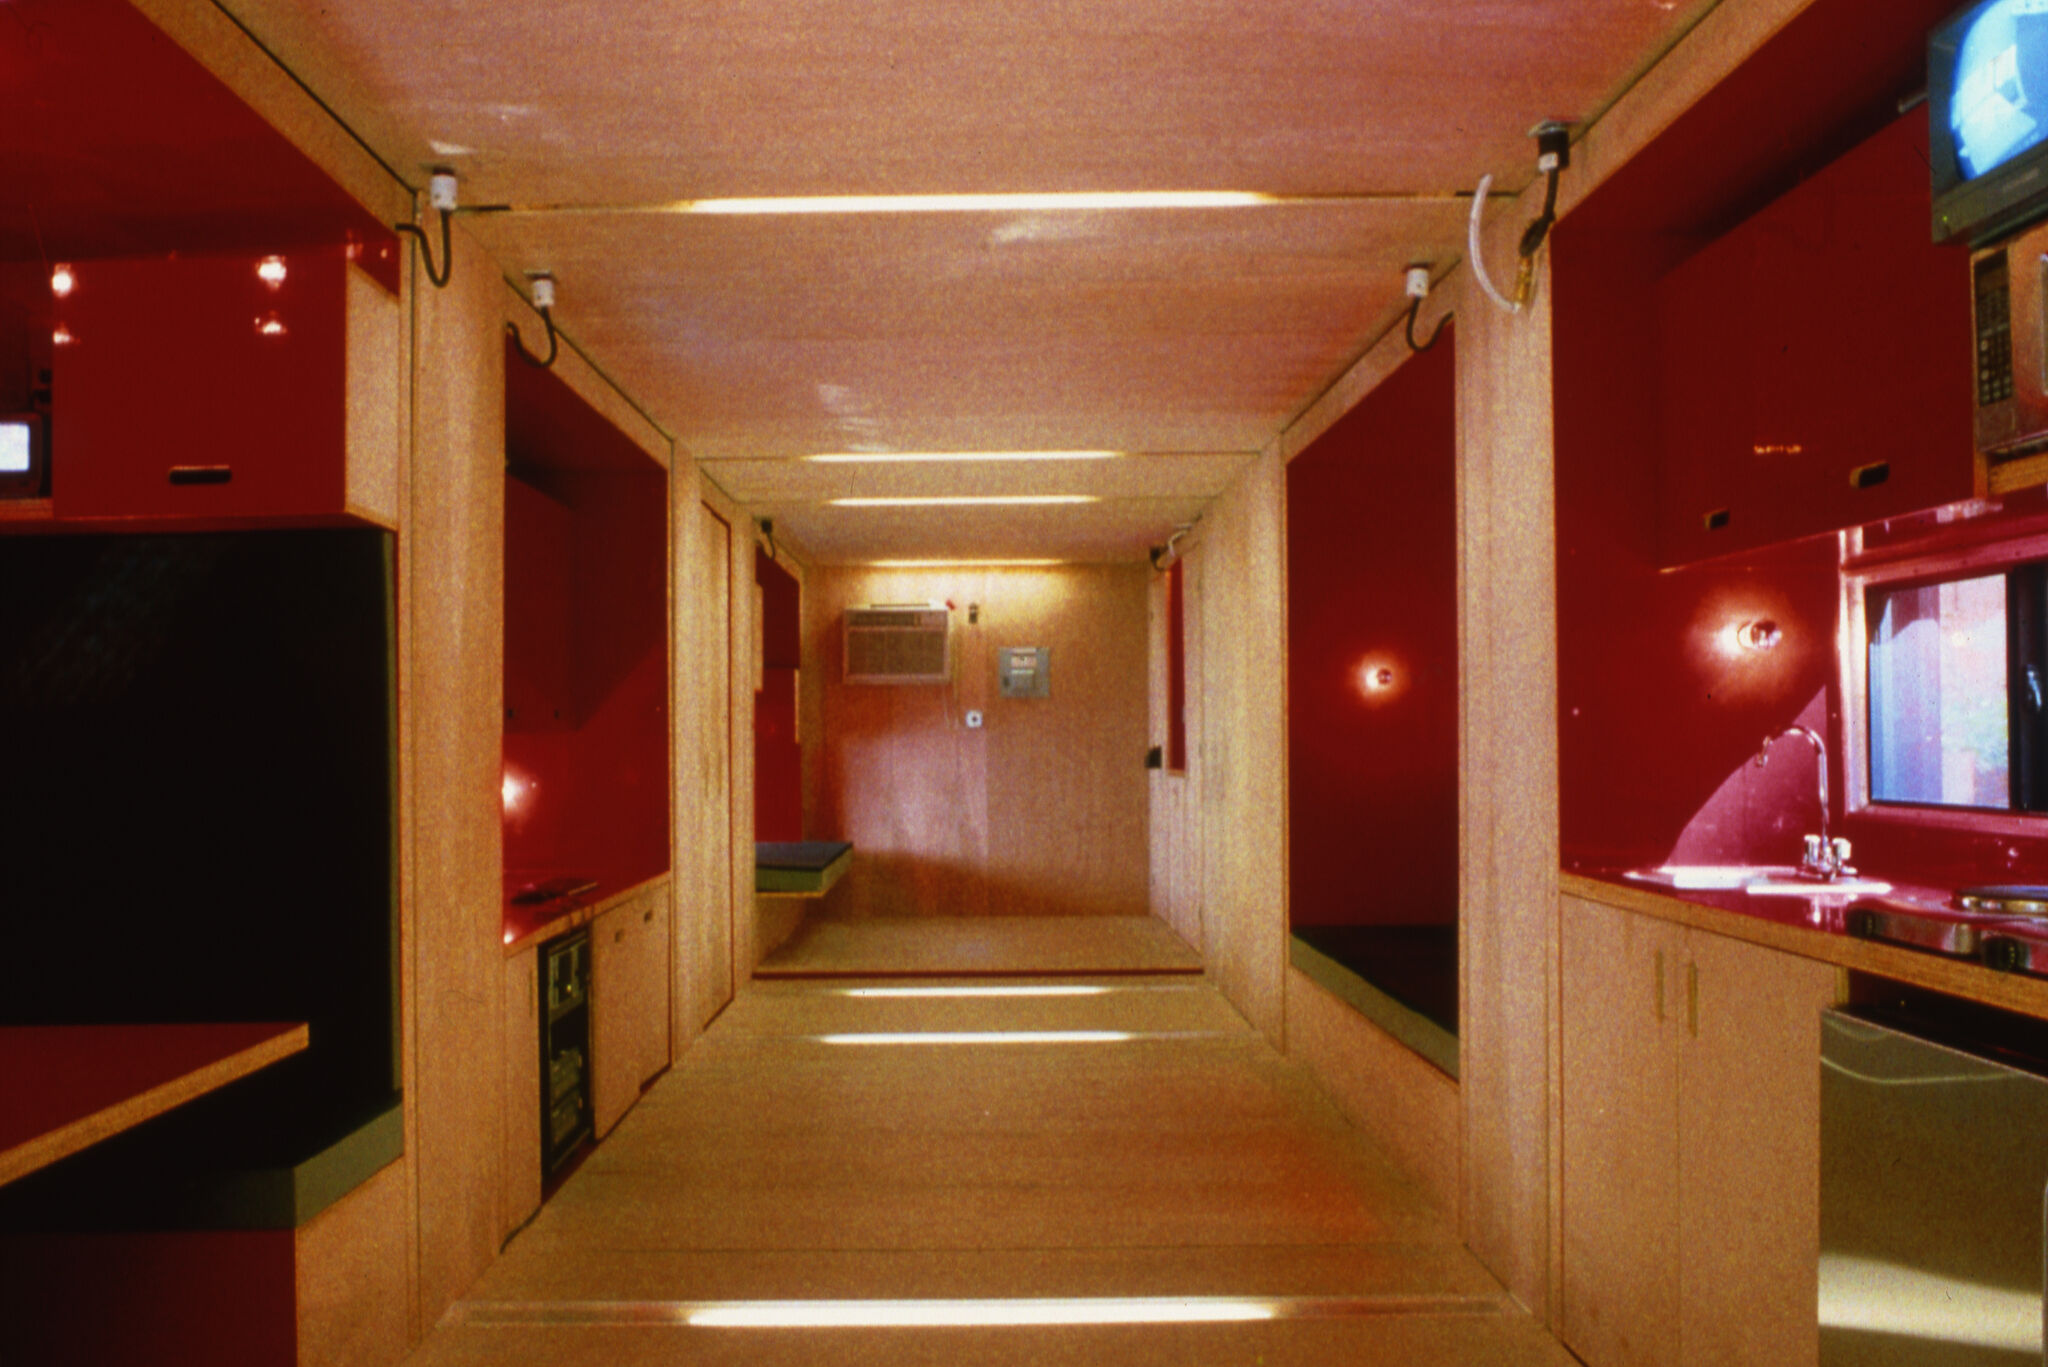 The inside of LOT-EK: Mobile Dwelling Unit, made up of red and wooden interiors.